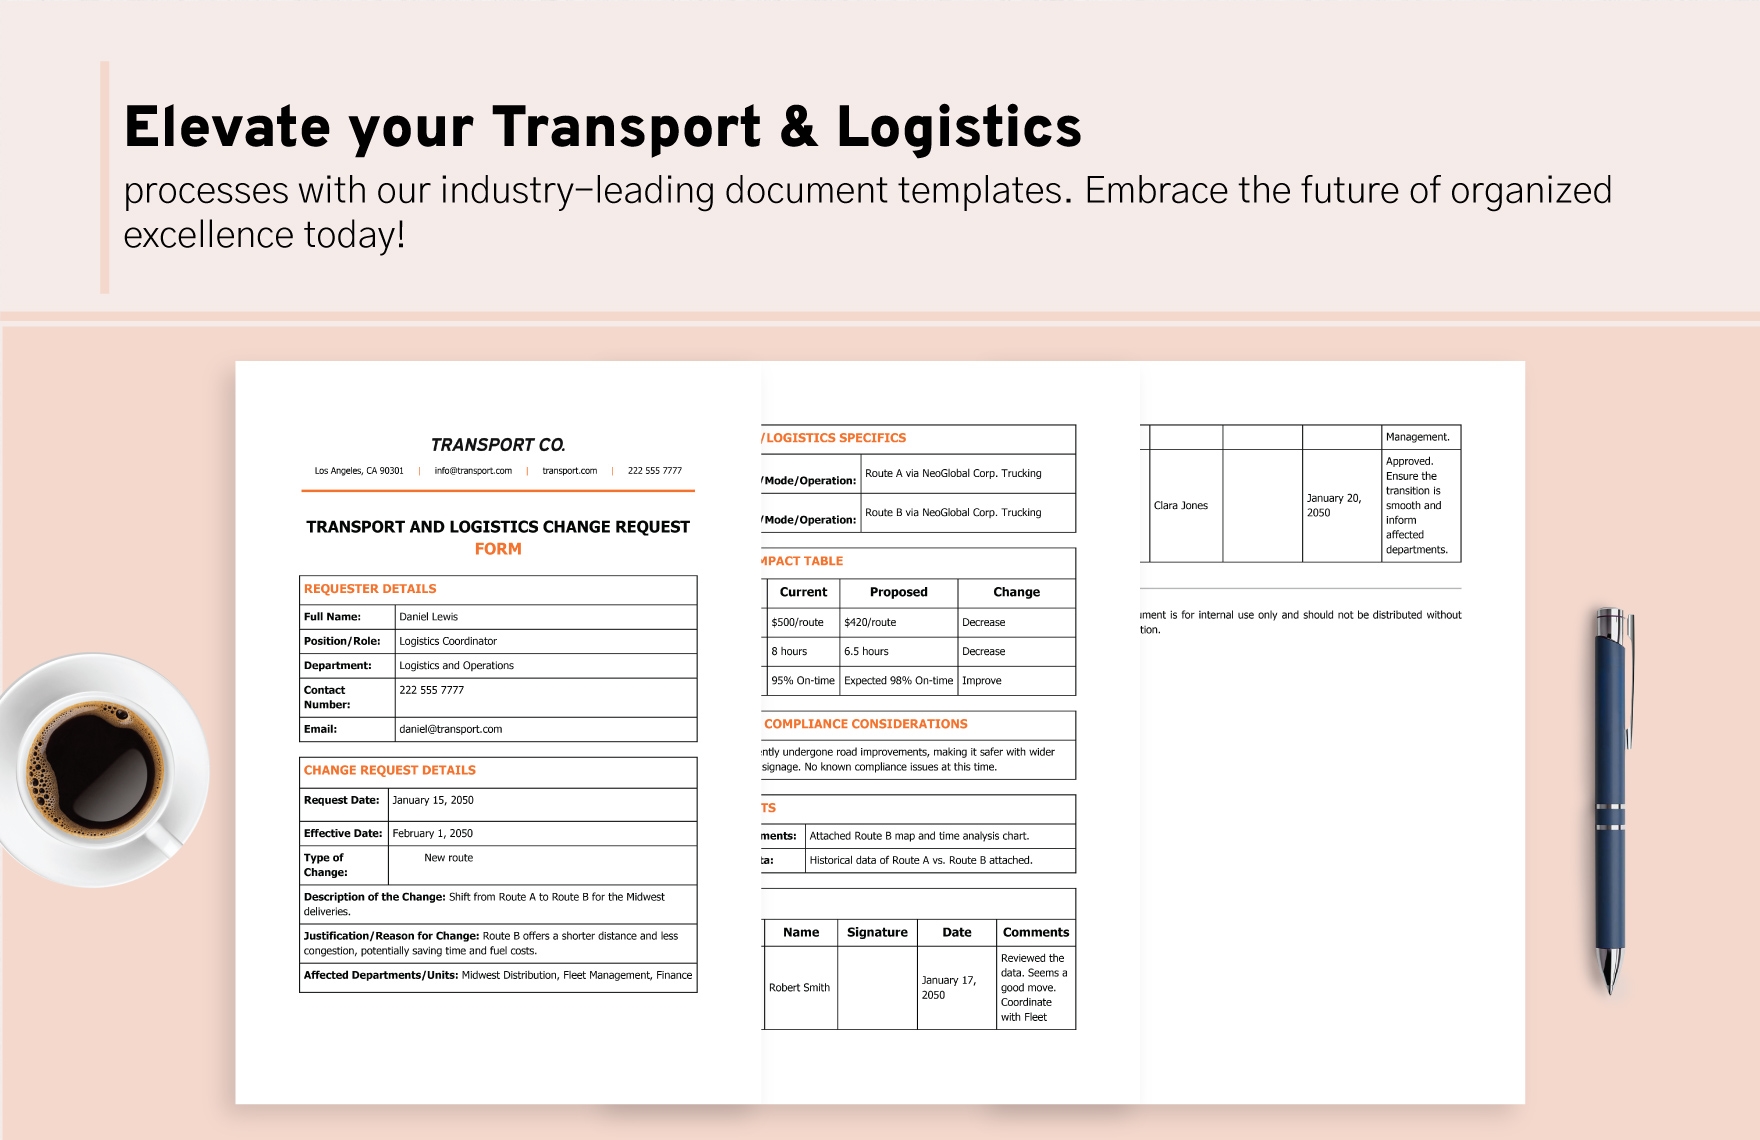 Transport and Logistics Change Request Form Template